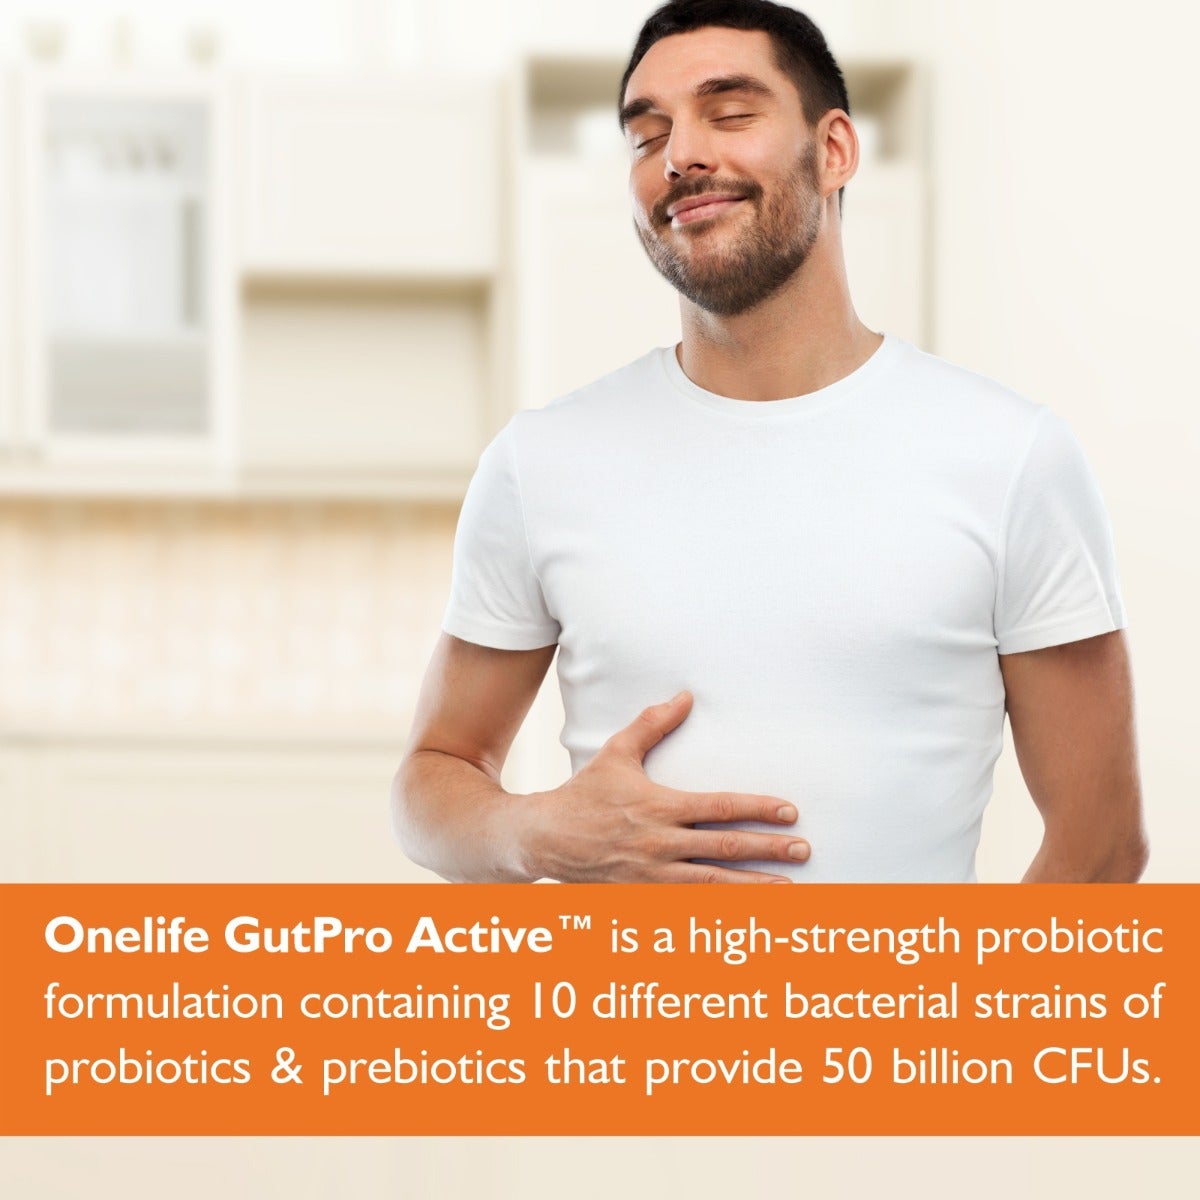 GutPro Activ™ - 60 Capsules with (50 Billion CFU in 10 Different Strains of Natural Probiotics with Prebiotic) For Digestive Gut Health & Immunity